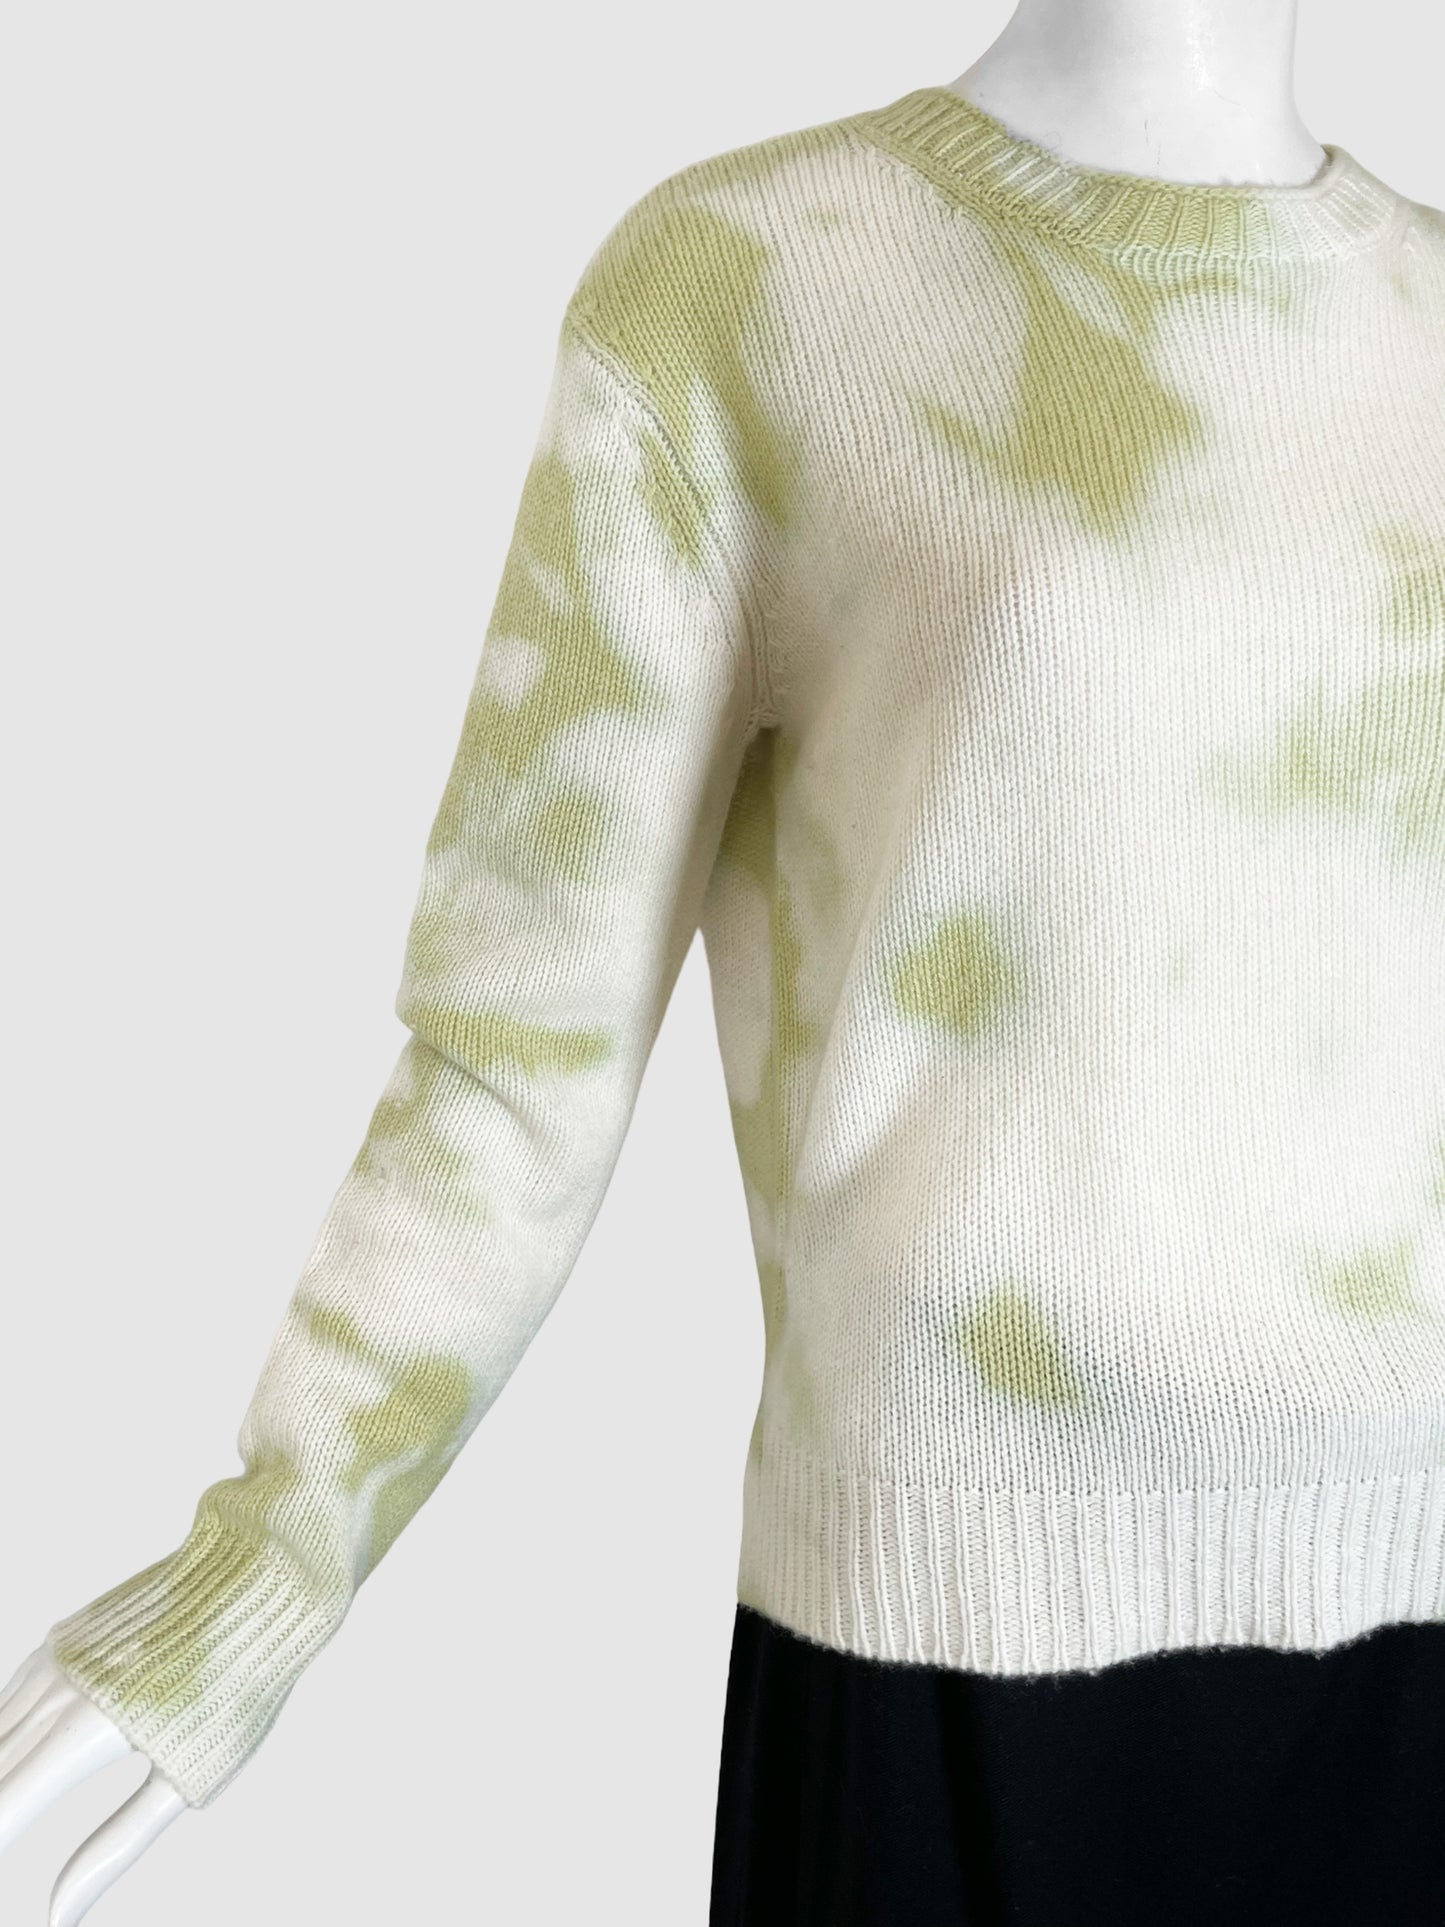 The Cashmere Project Tie Dye Sweater - Size L